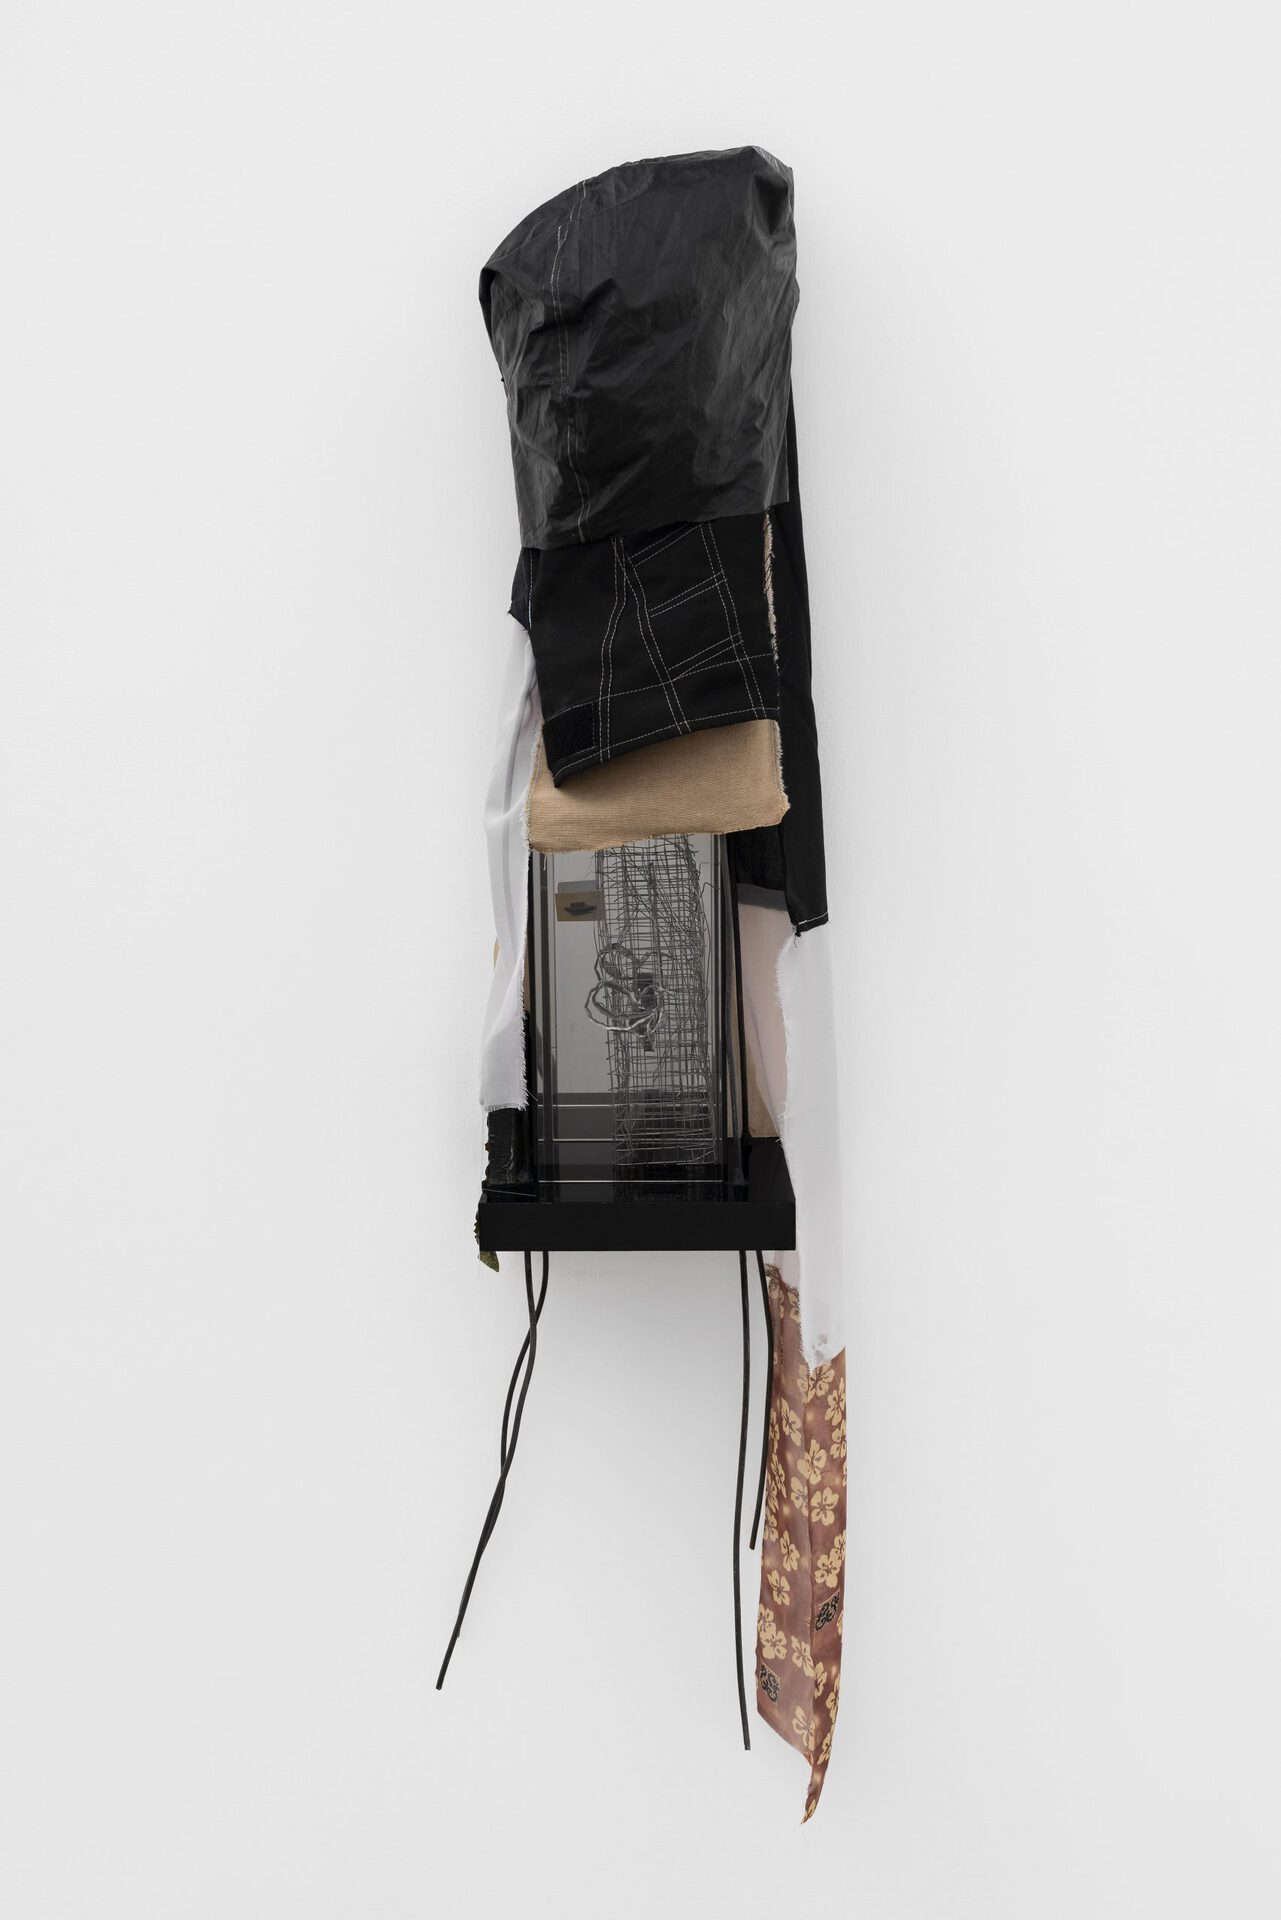 Ania Bąk, Clothed Tower, 2022 hdf board, steel, glass, textiles, plant fragments, paint, battery, magnet, 130 x 35 x 25 cm